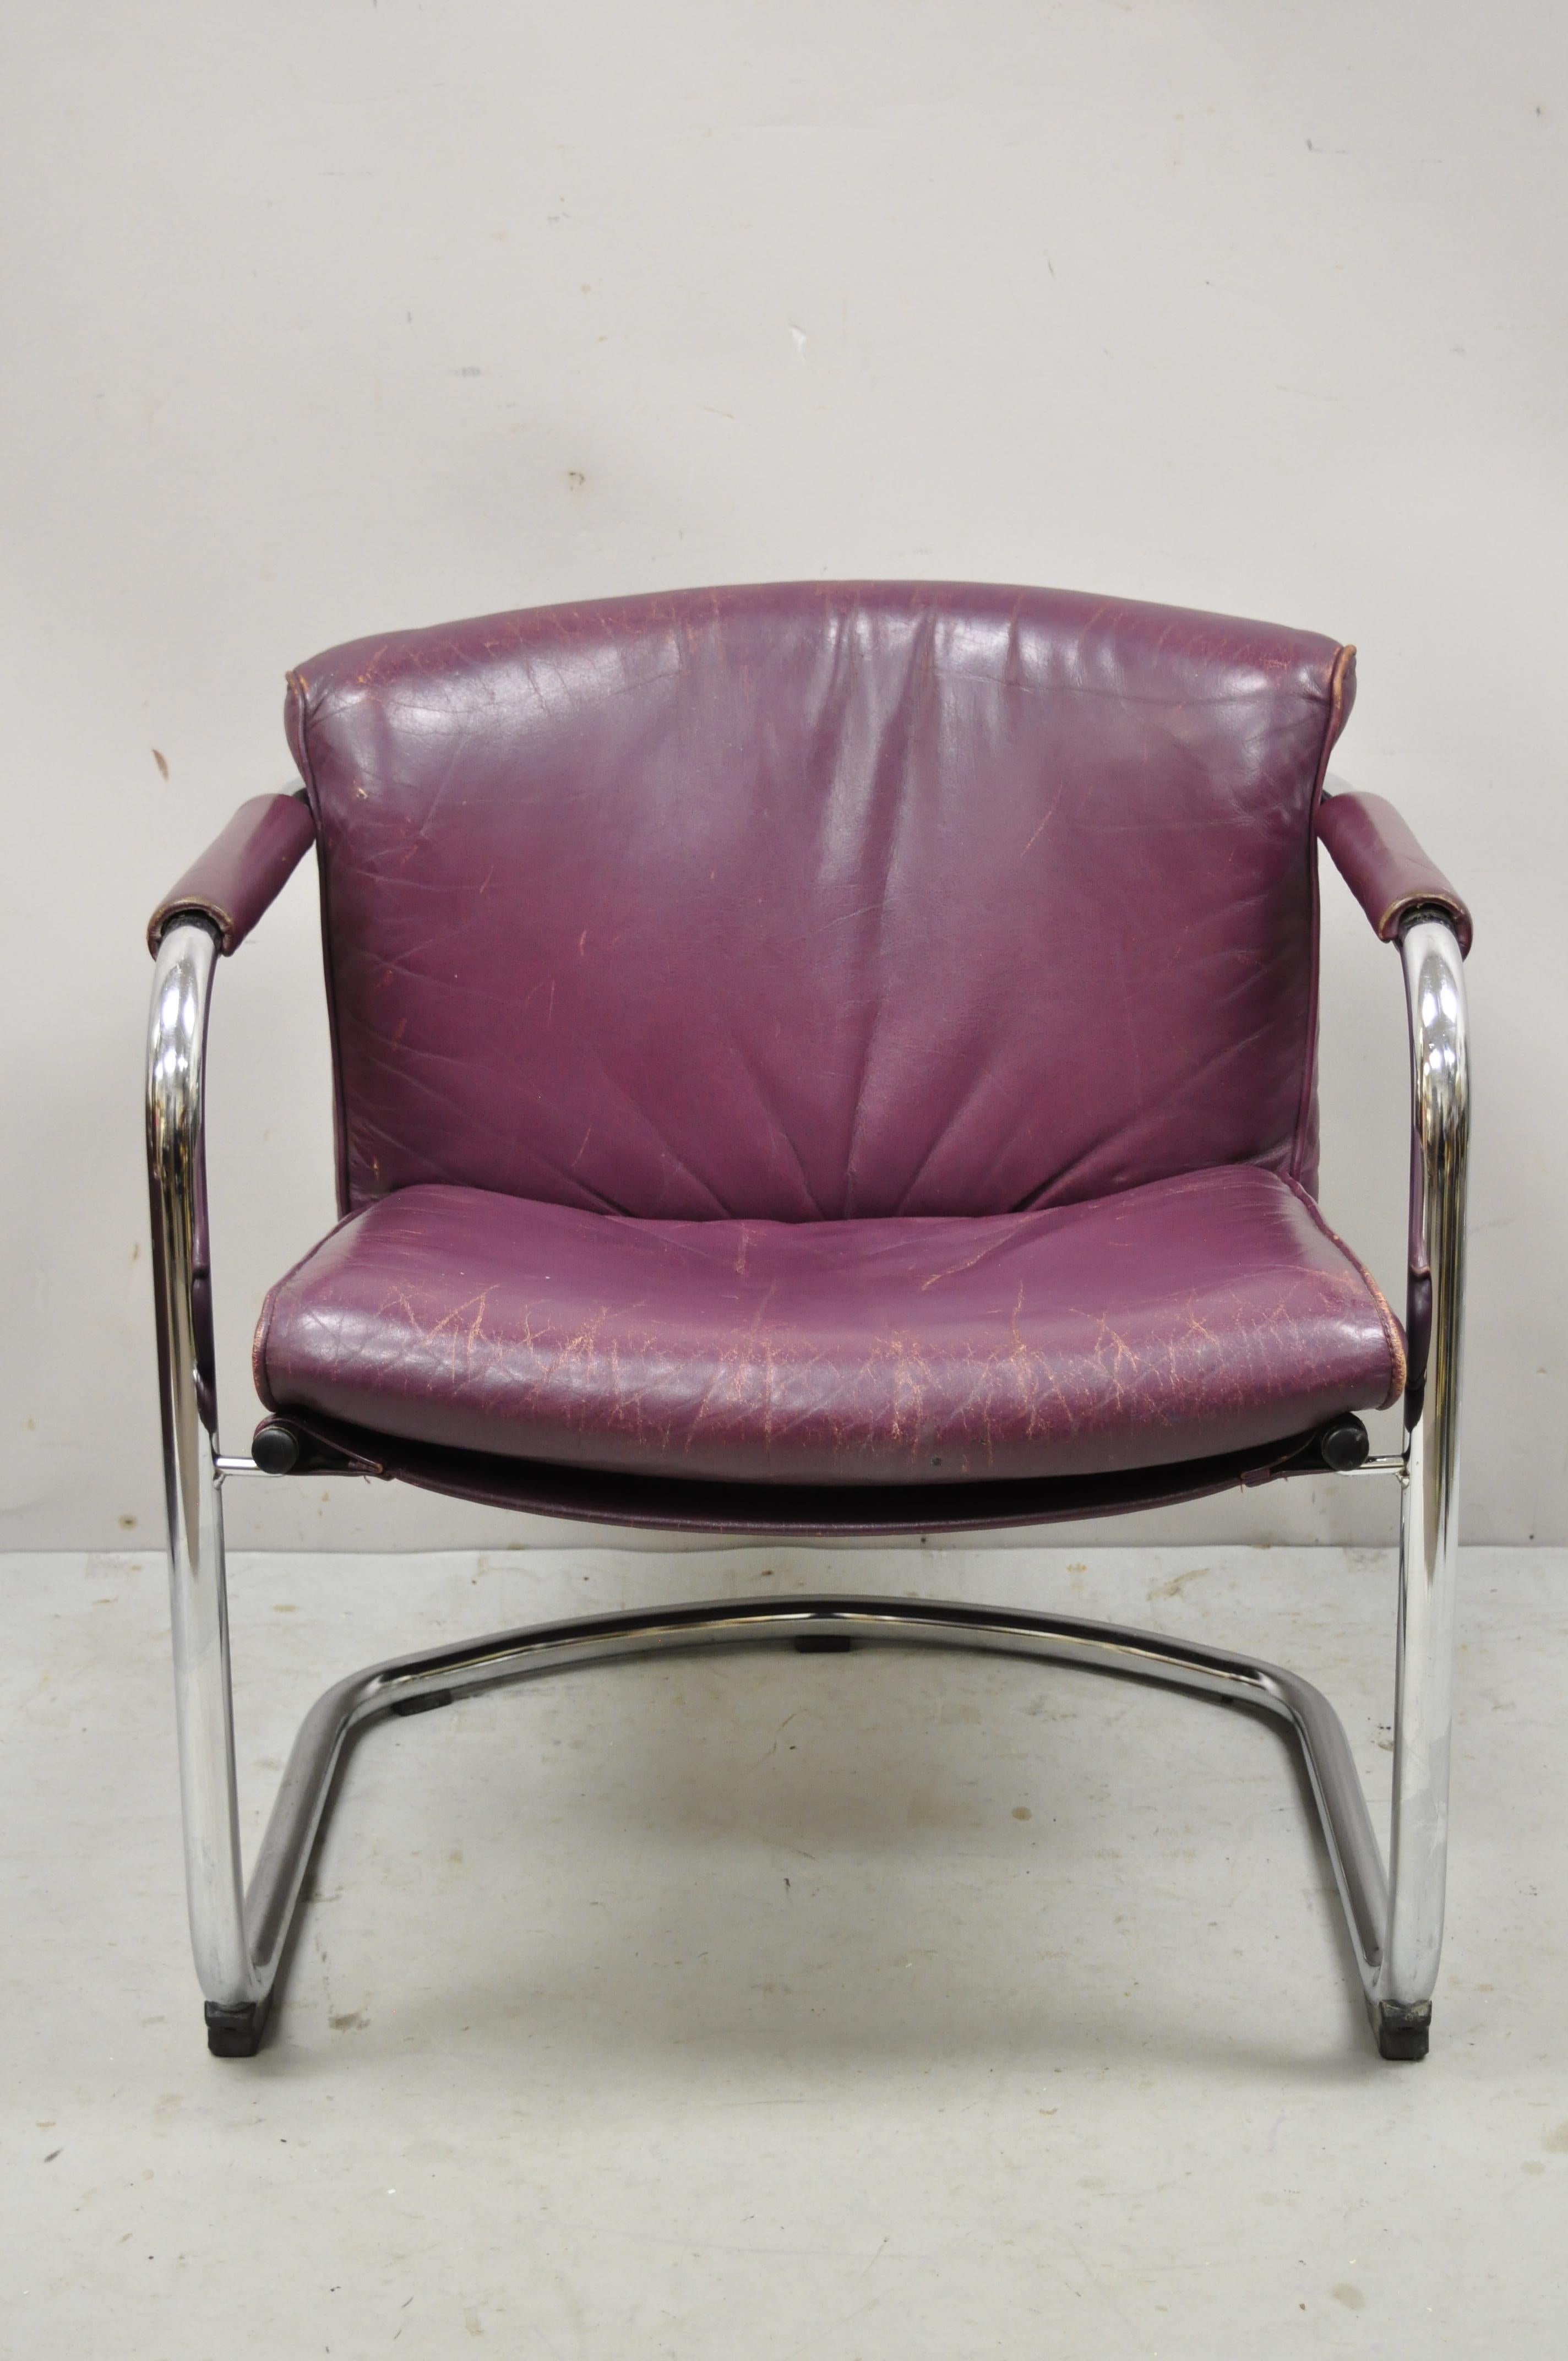 Vintage IRE Furniture Skillingaryd Swedish Modern Purple Leather Sling lounge chair. Item features chrome tubular steel metal frame, purple leather cushion and sling, leather wrapped arms, original label, clean modernist lines, great style and form.